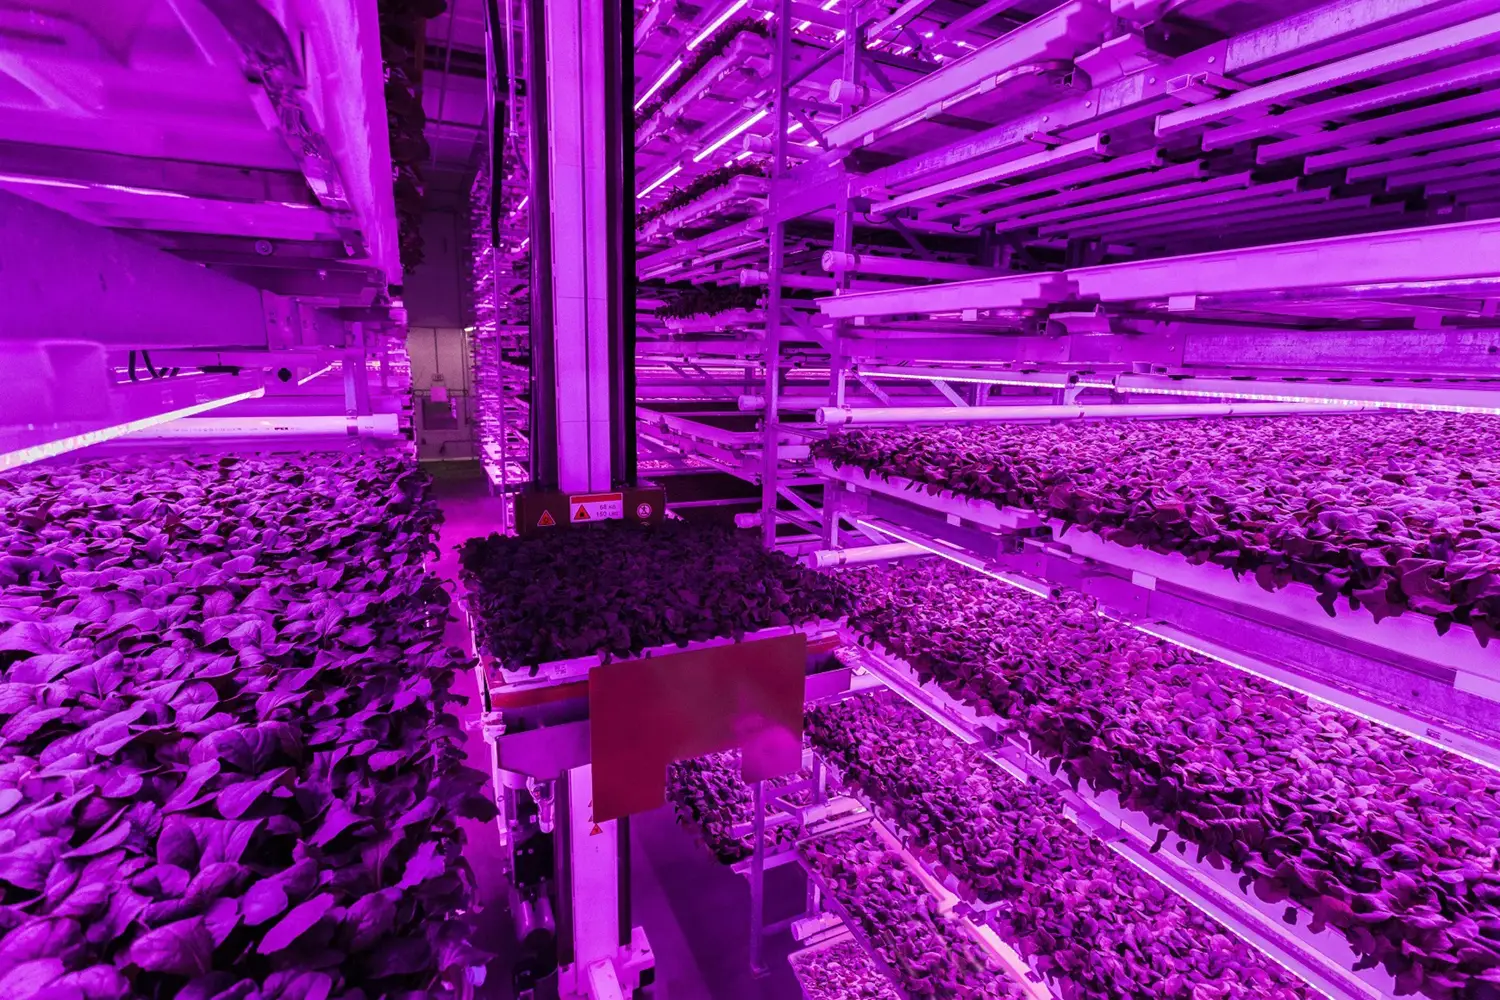 A robot moves amidst densely packed shelves of greens. The farm is illuminated by magenta light.